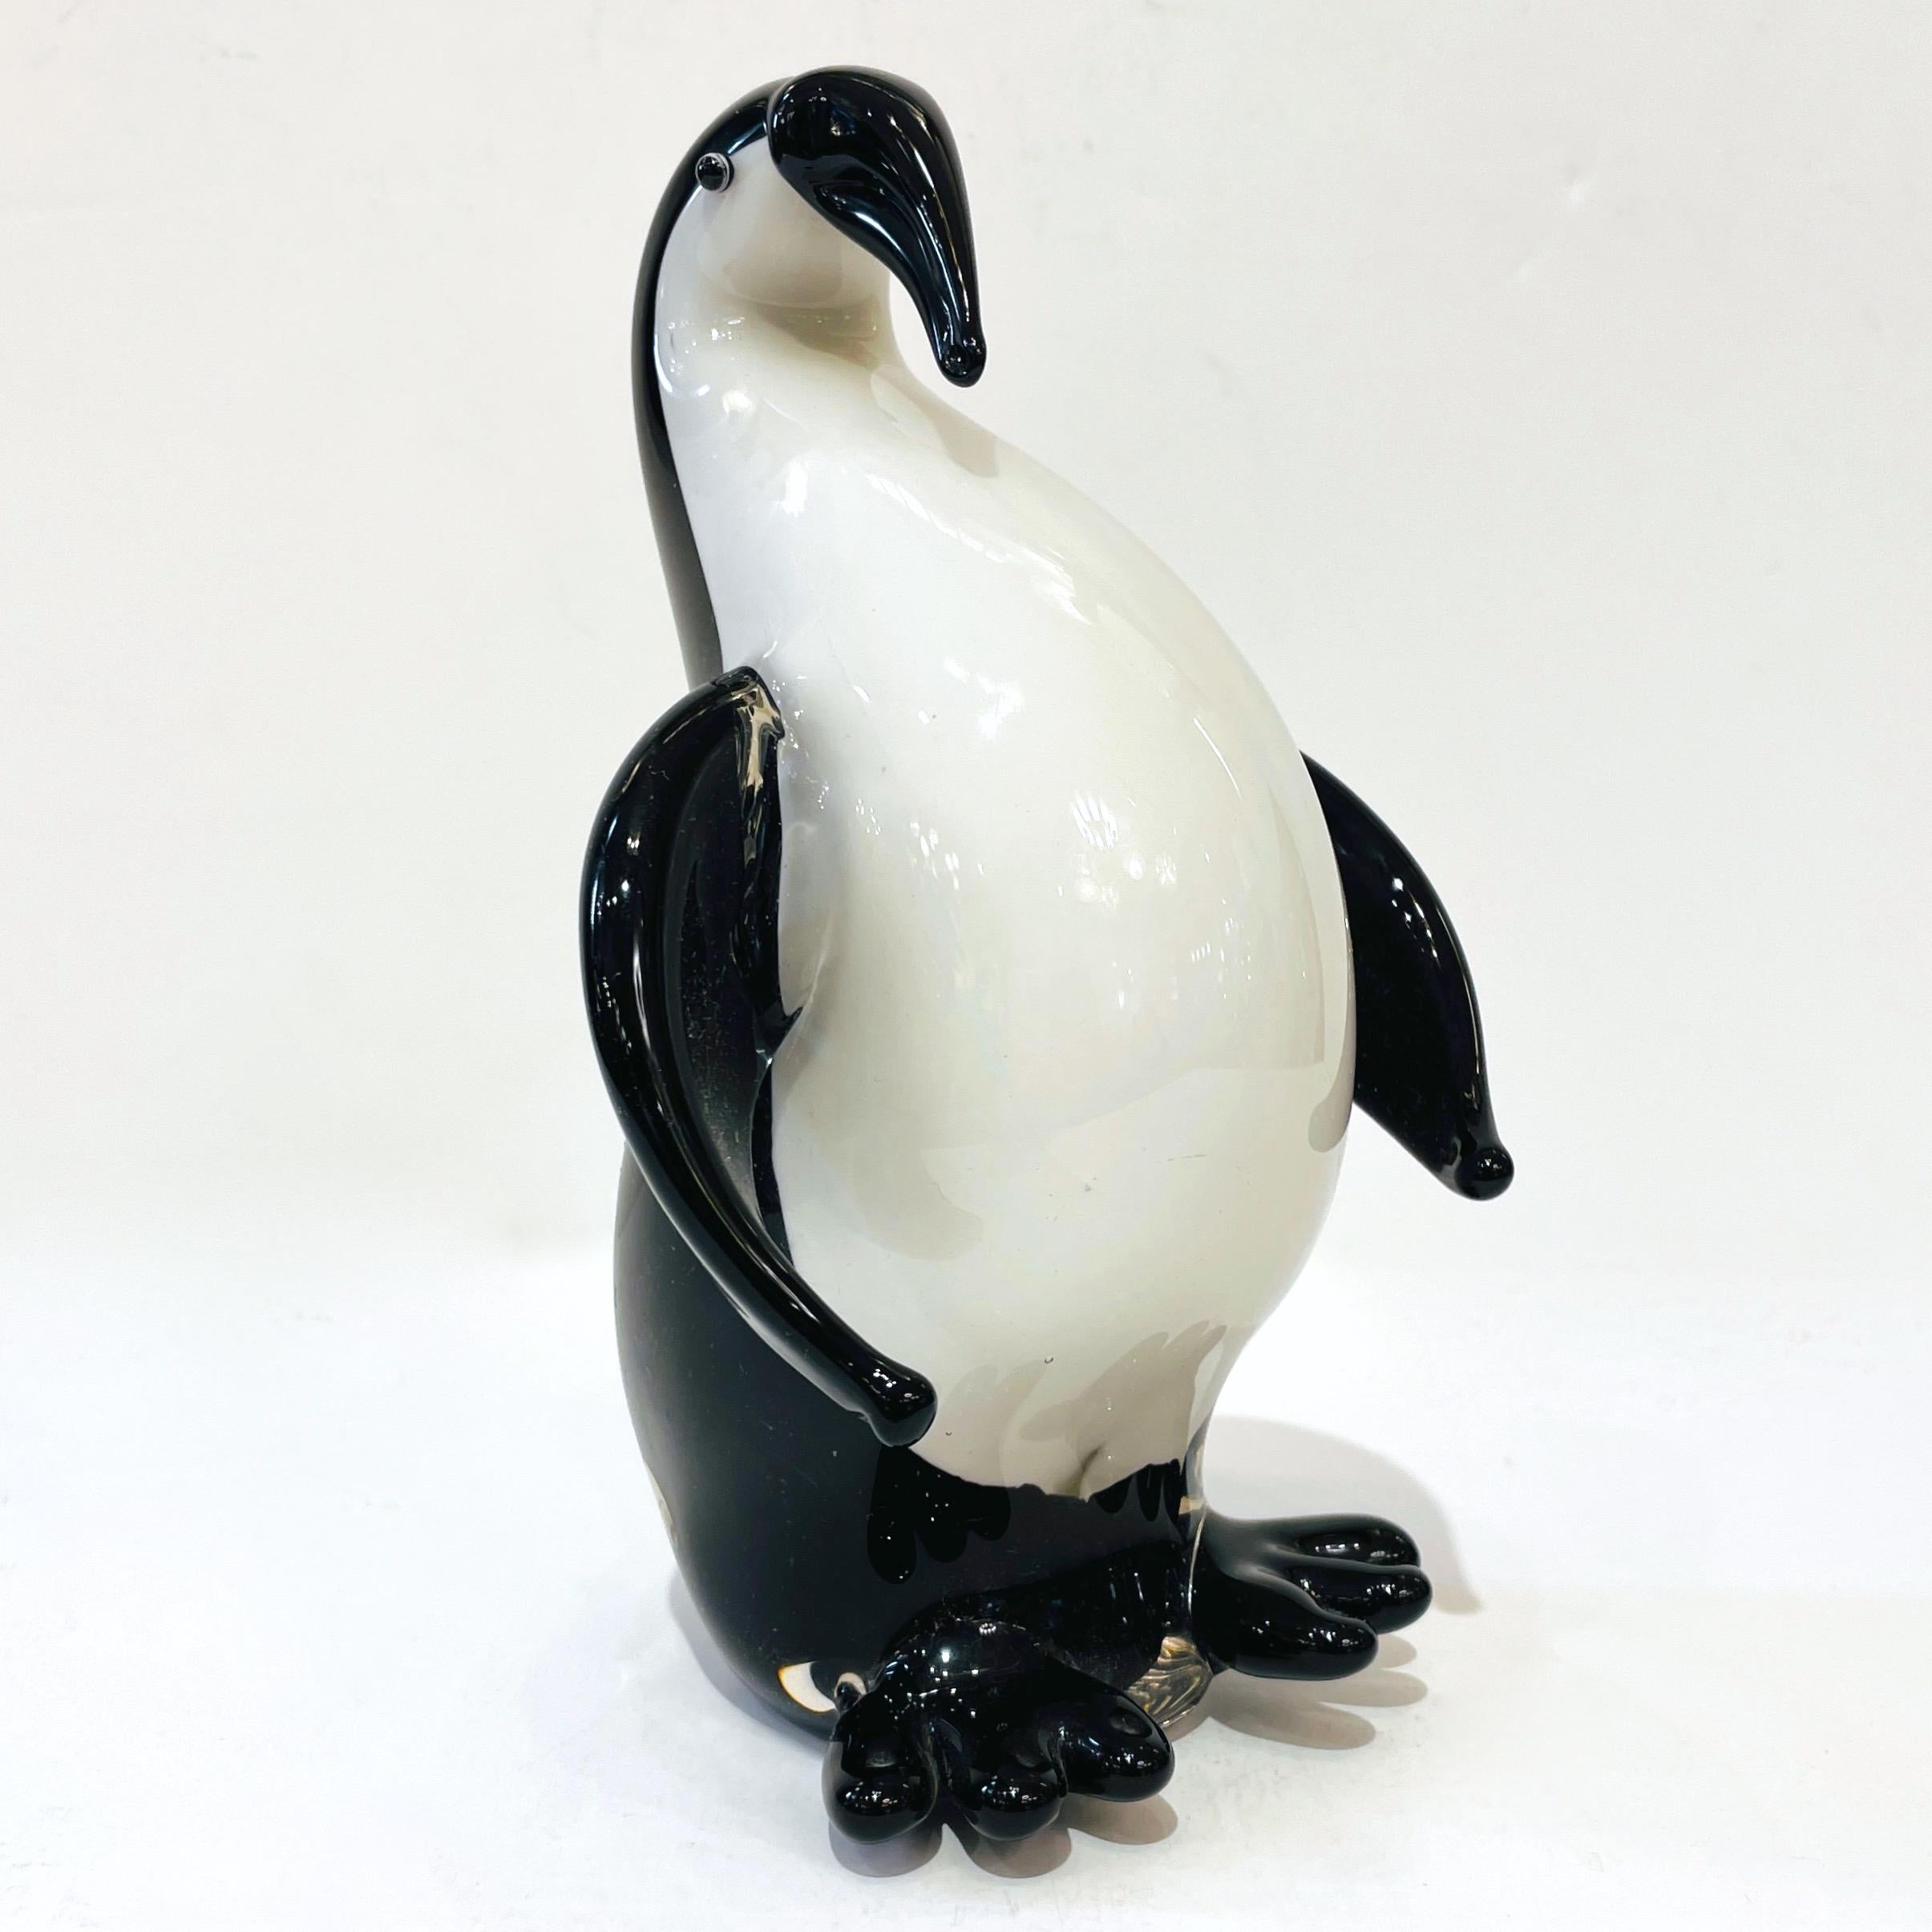 A modern Venetian penguin Art sculpture in blown Murano glass, a very cute realistic representation with an arched back to give movement to the animal, the central solid white core is deeply overlaid in black and crystal, with black feet and open